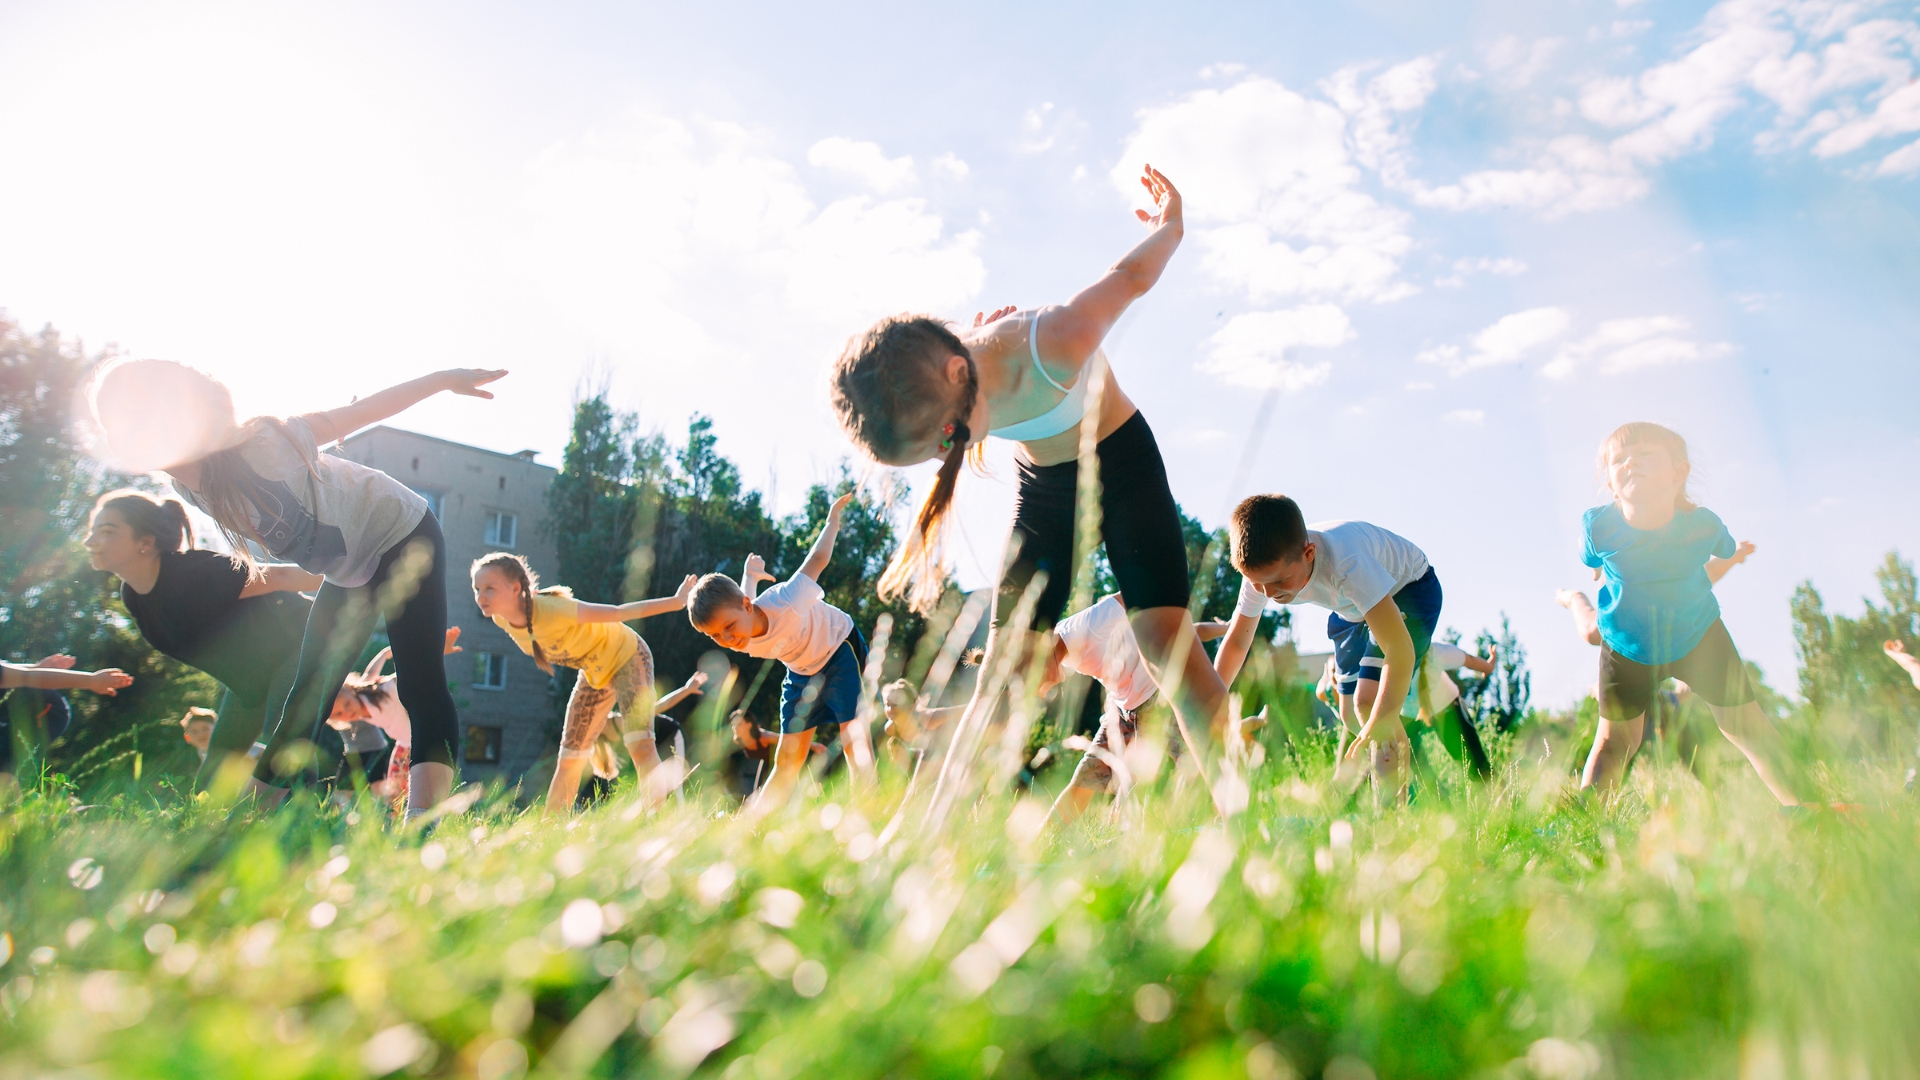 What Are Some Engaging Outdoor Yoga Poses For Children? 